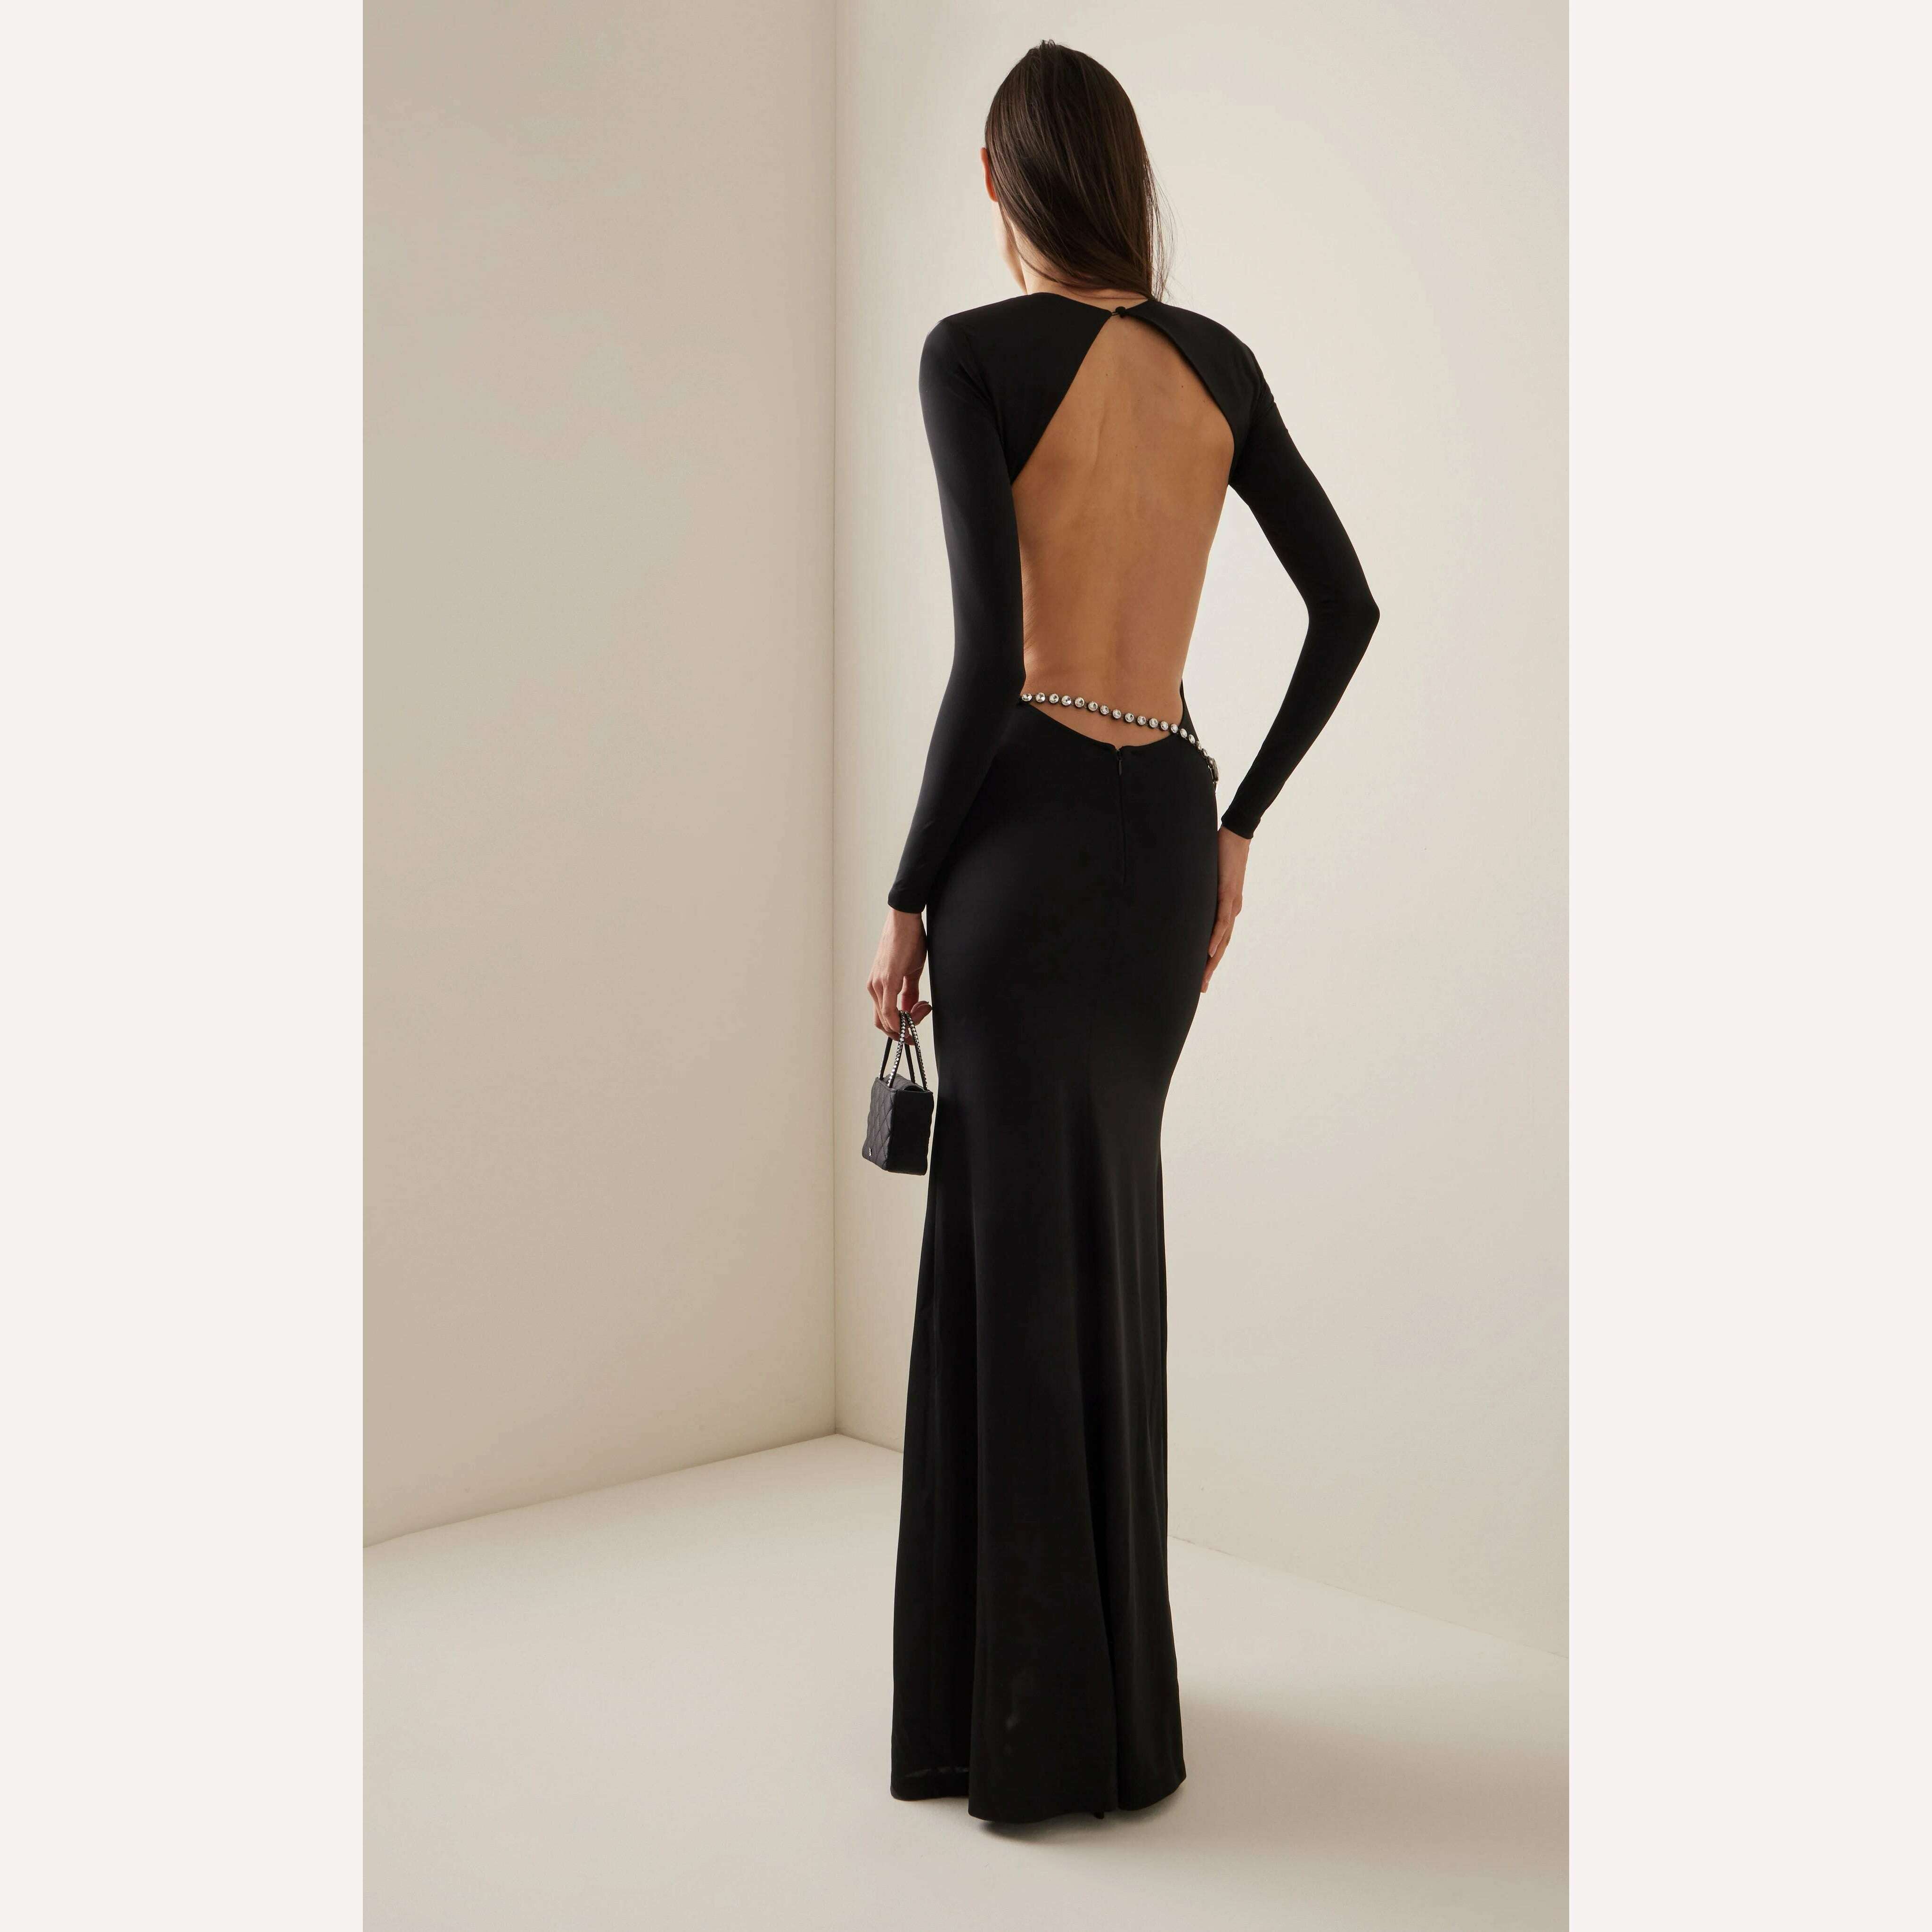 KIMLUD, Shining Diamonds Waist Chain Sexy Backless Black Long Bandage Dress Elegant Woman Evening Party Dress Cocktail Party Outfit, KIMLUD Womens Clothes